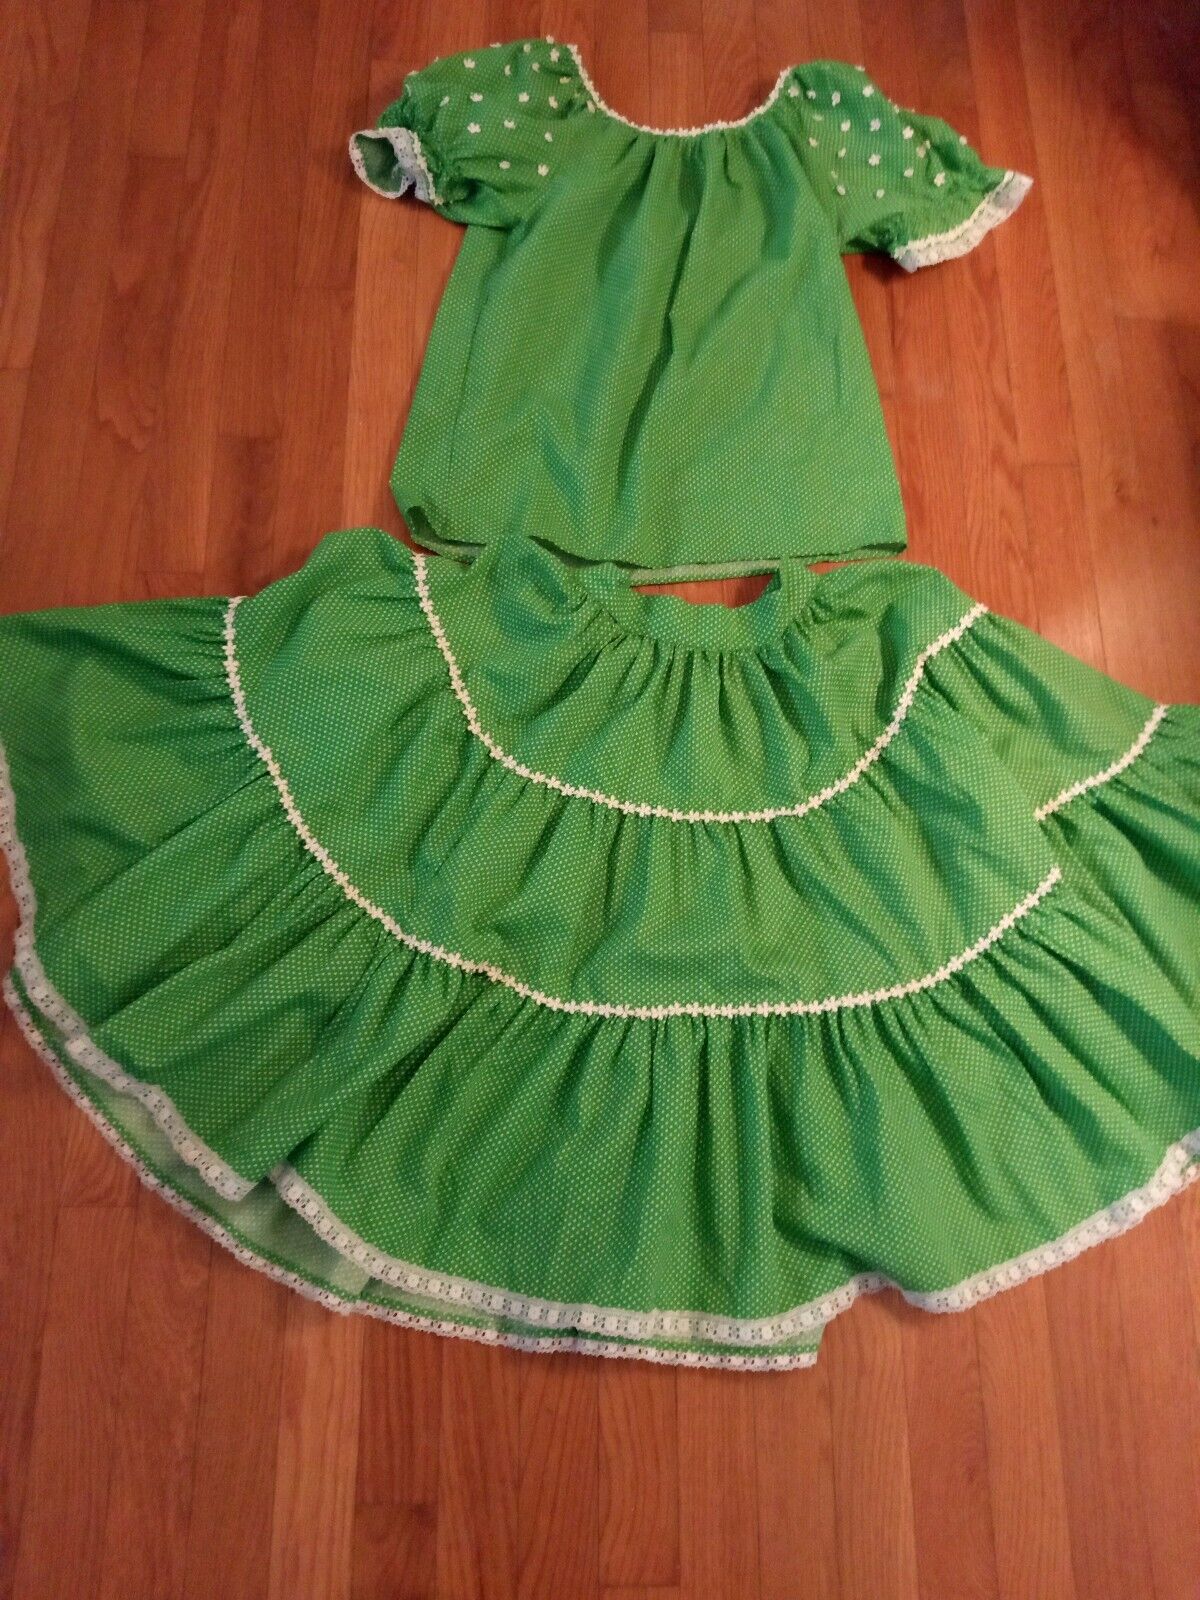 Vintage Square Dance Skirt And Top Size S Green With White Polka Dots